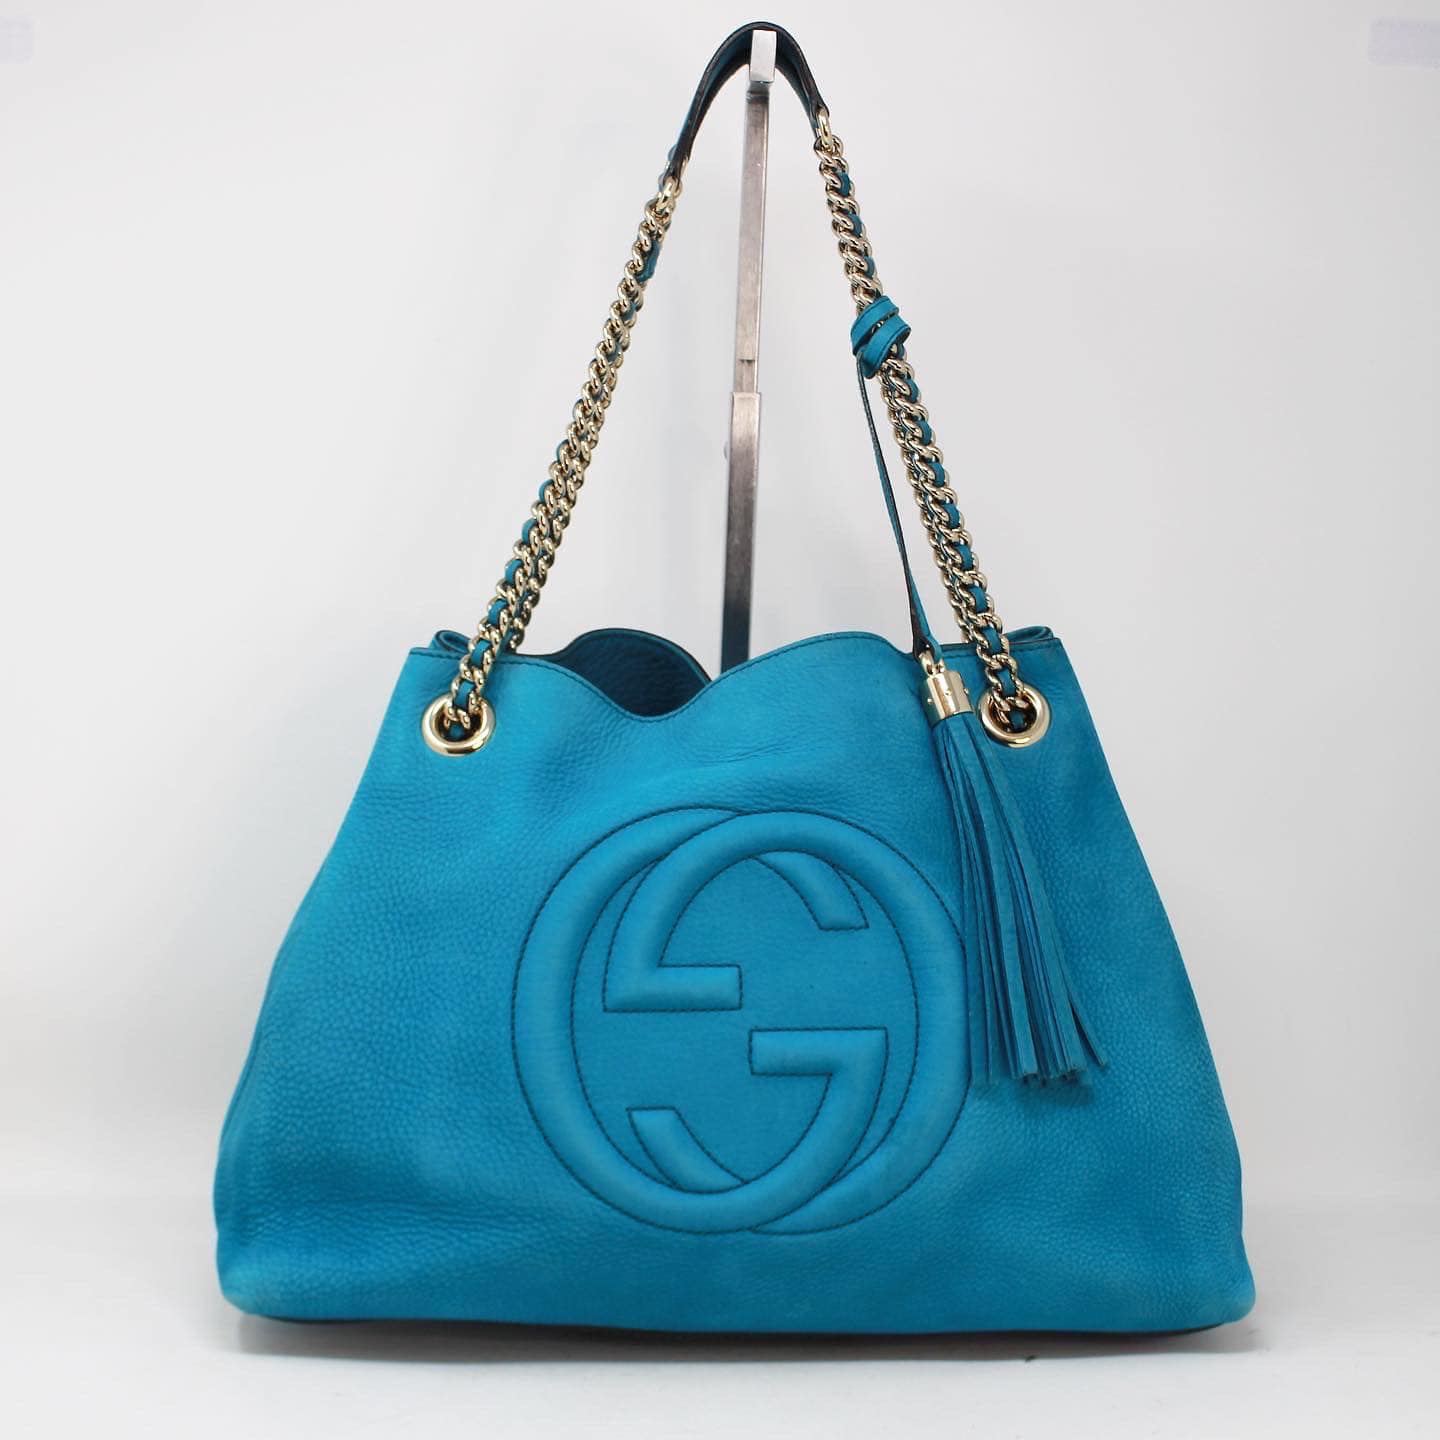 GUCCI 36715 Soho Turquoise Leather Shoulder Bag a